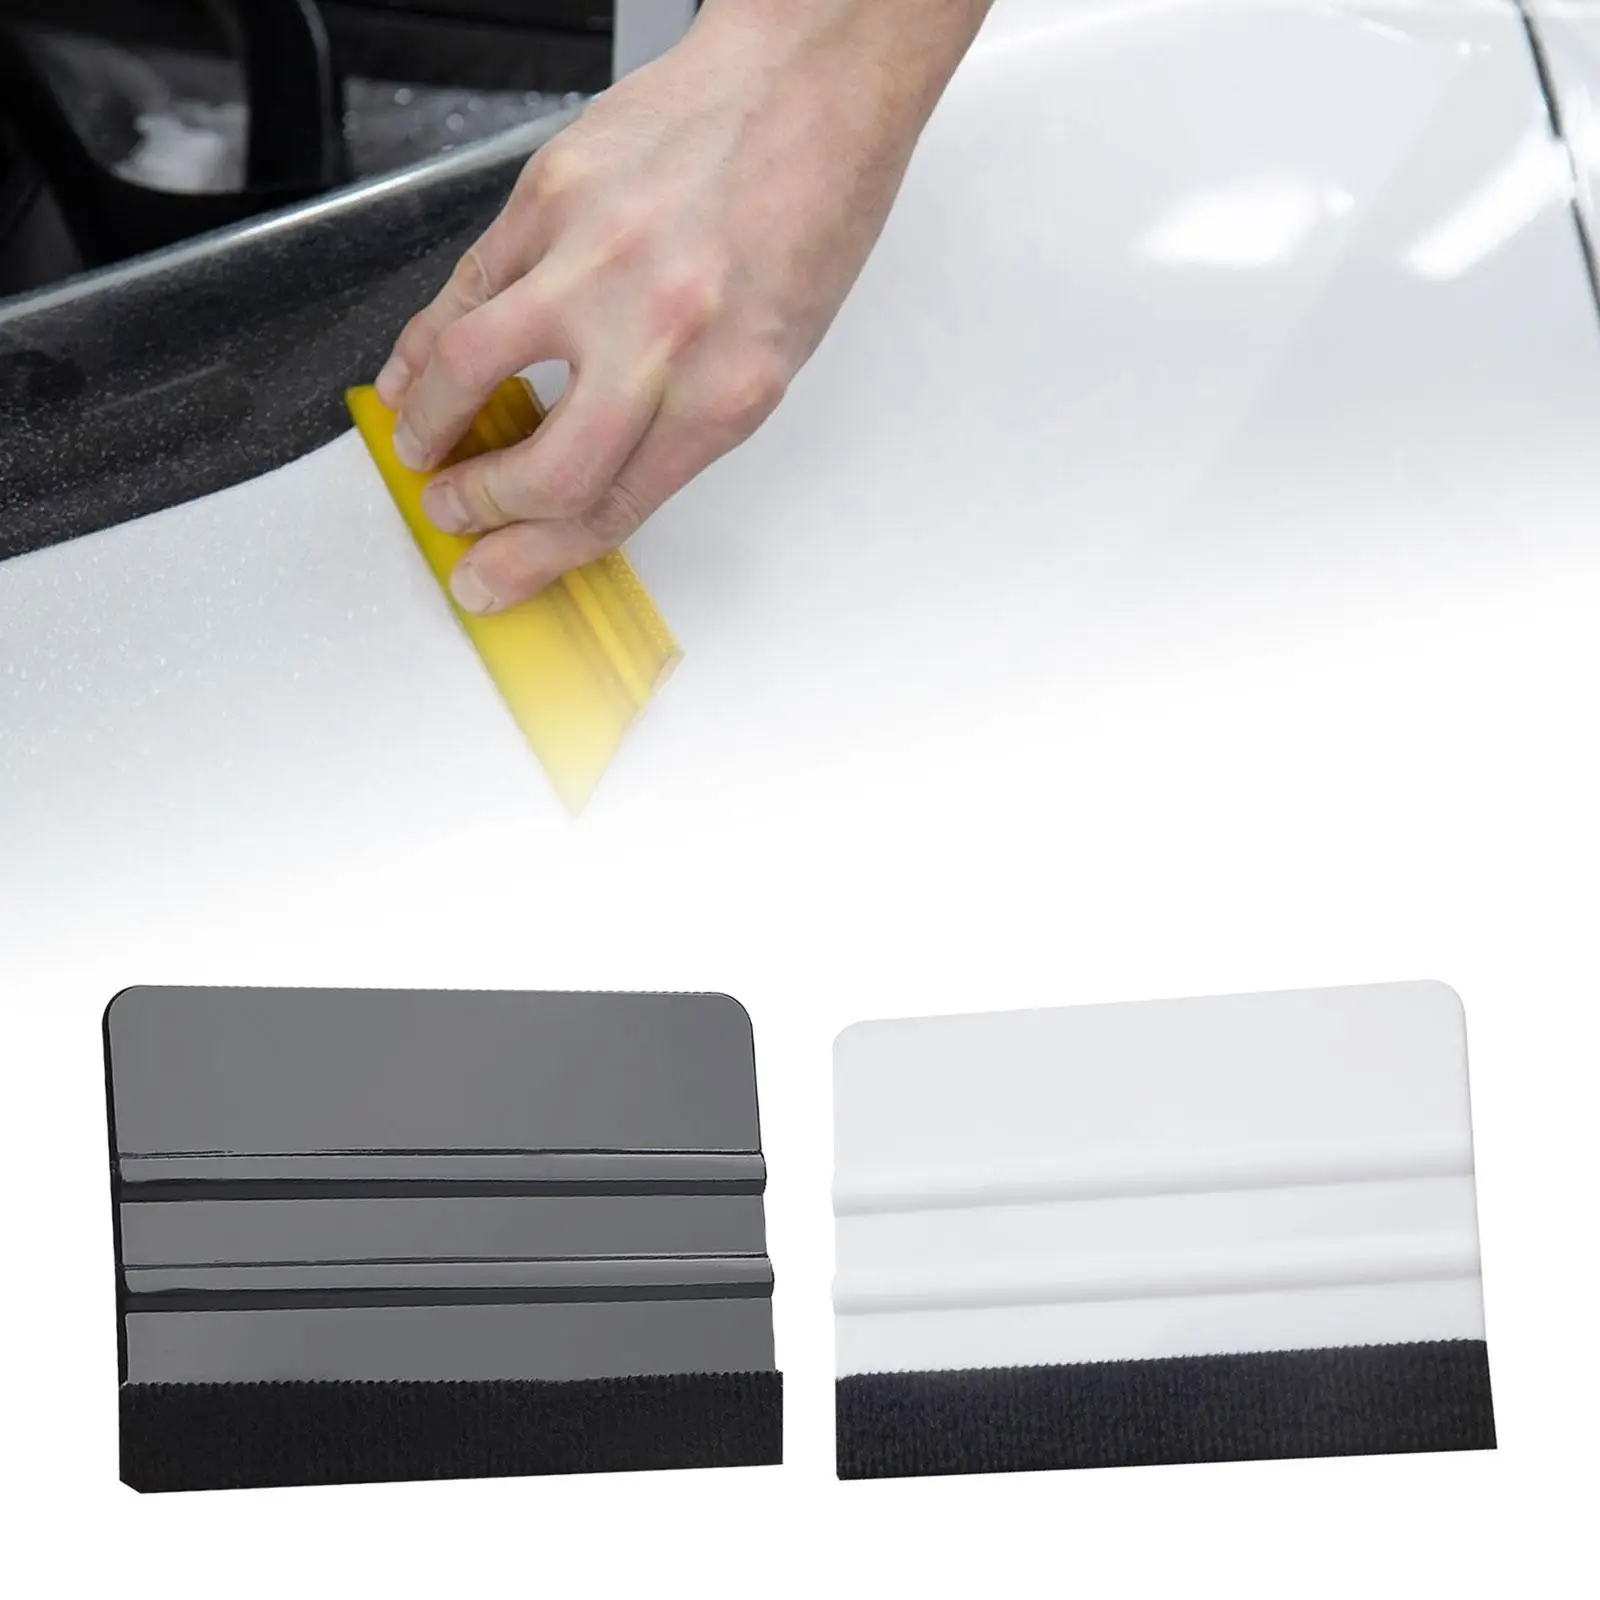 5x Auto Film Scraper Paint Scraper for Making Surface Tidy Paint Protection Film Pushing Out Bubble Lines Window Tint